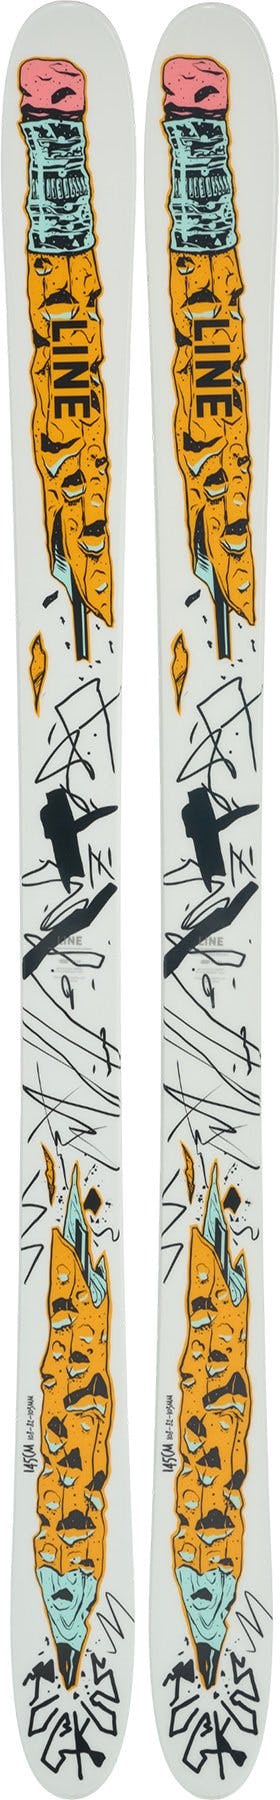 Product image for Ruckus Skis - Kids